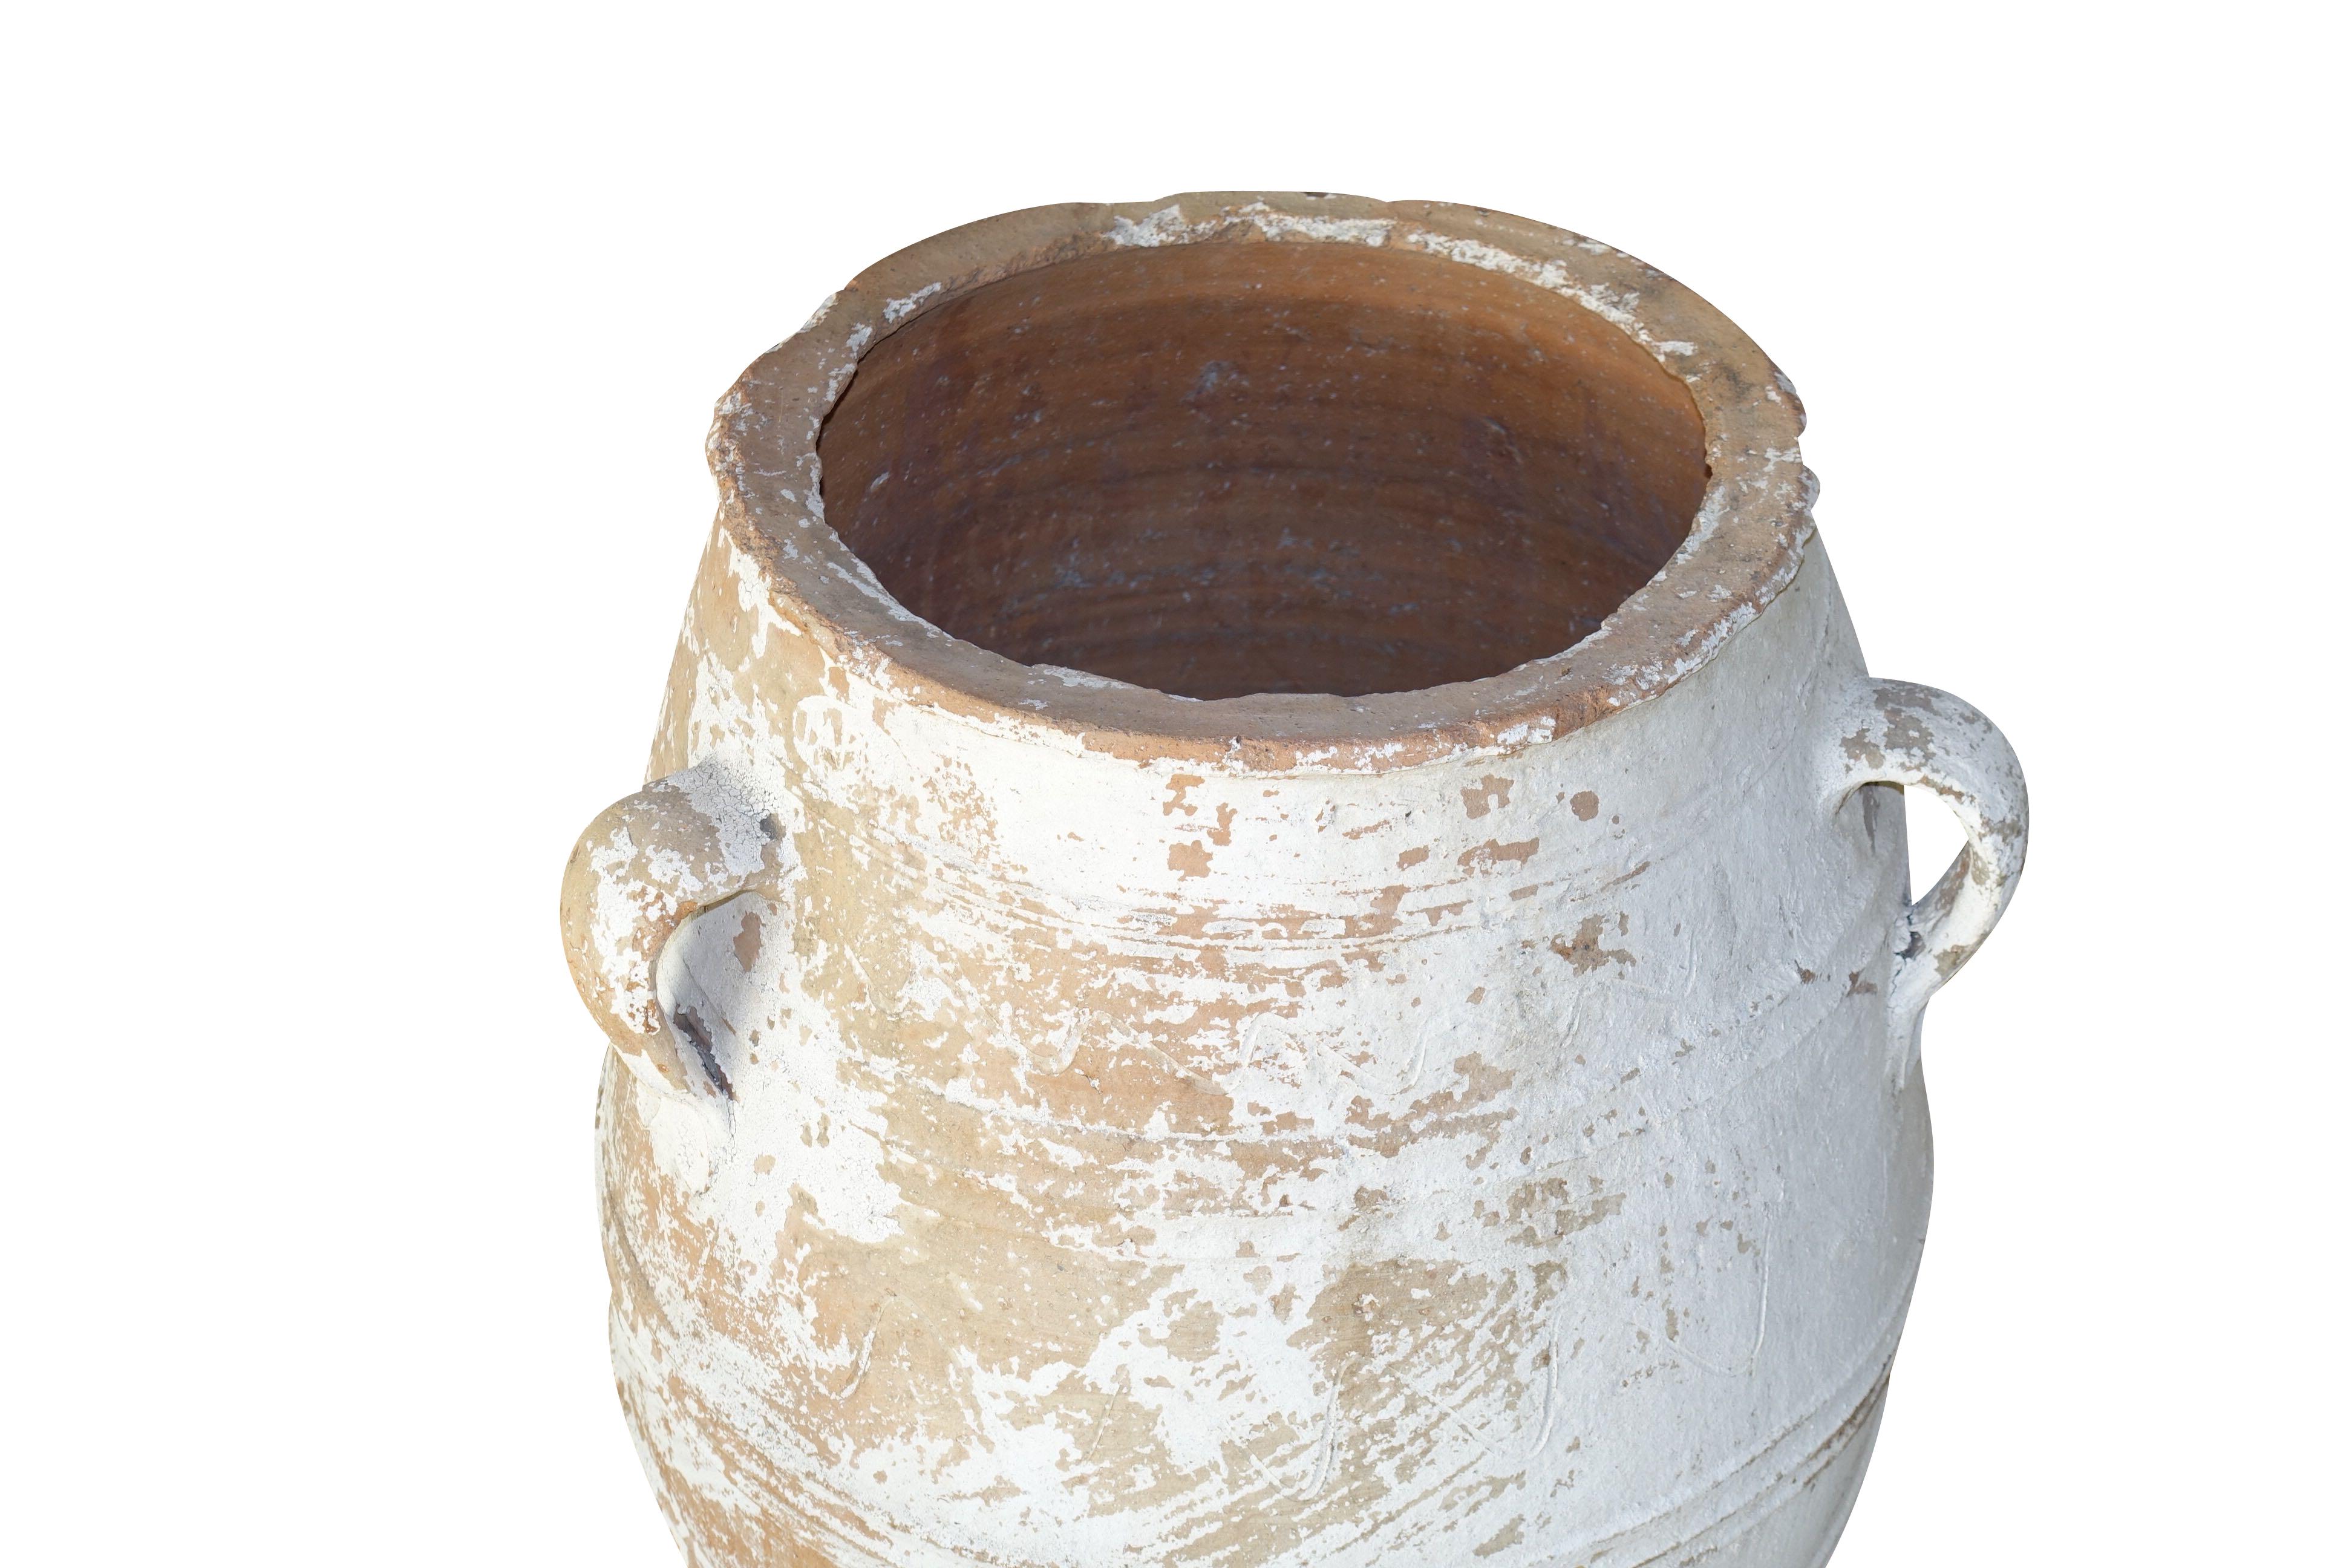 1920s large Greek olive jug with original painted patina.
There are three large handles and decorative horizontal ribbed detailing.
The terra cotta jug was originally used to store olives.
Top opening is 13